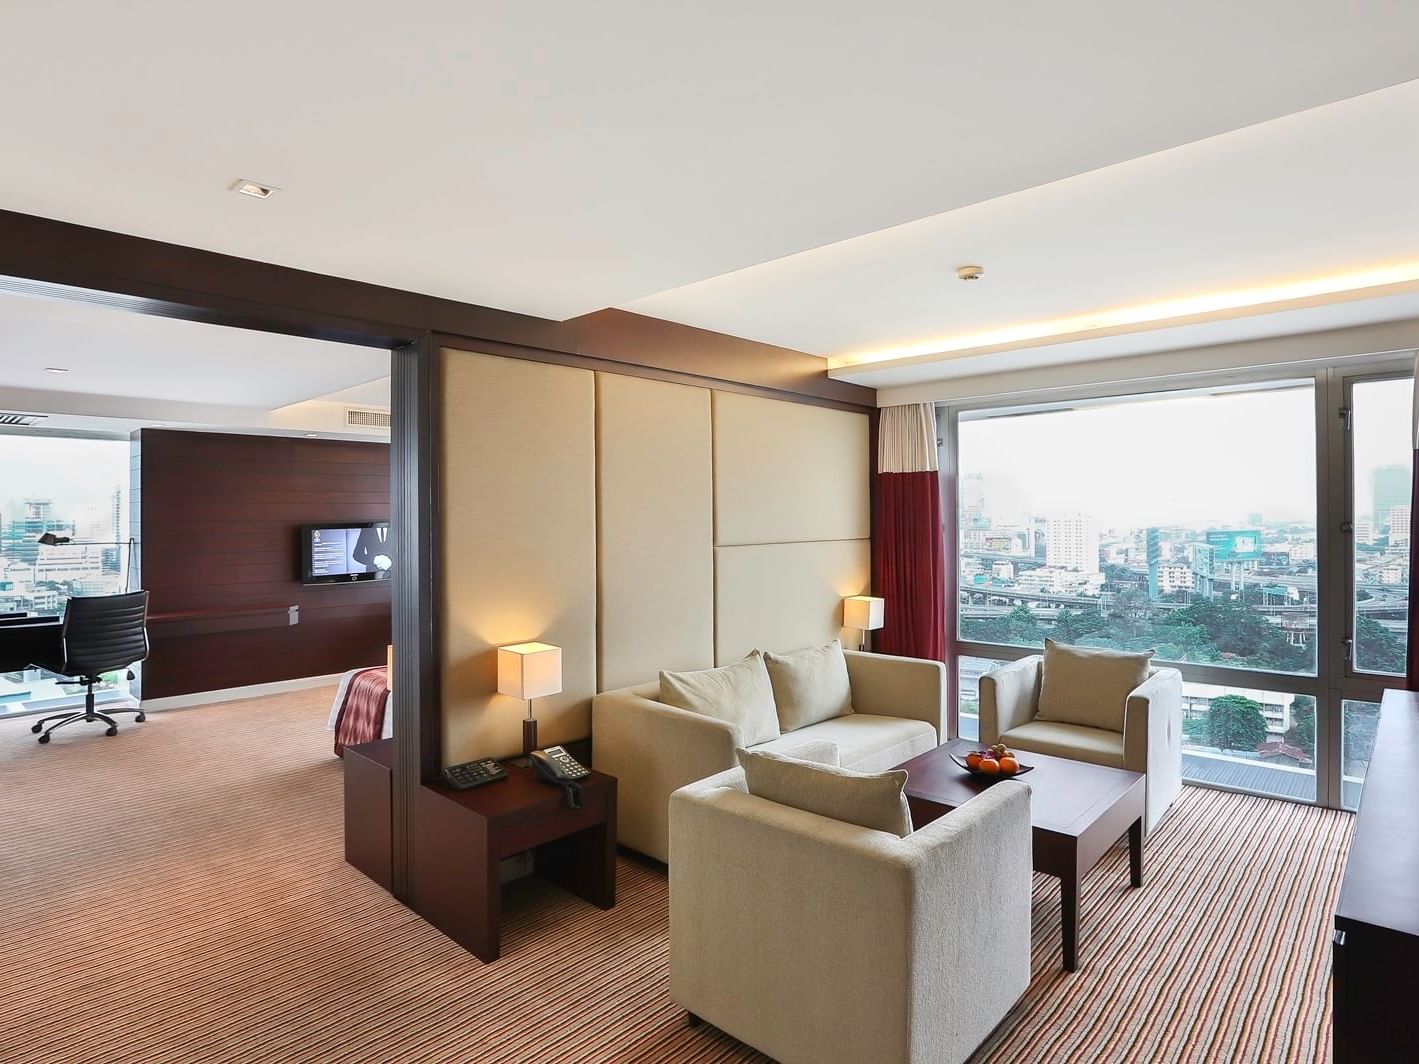 Livingroom with a city view in Executive Suite at Eastin Hotels